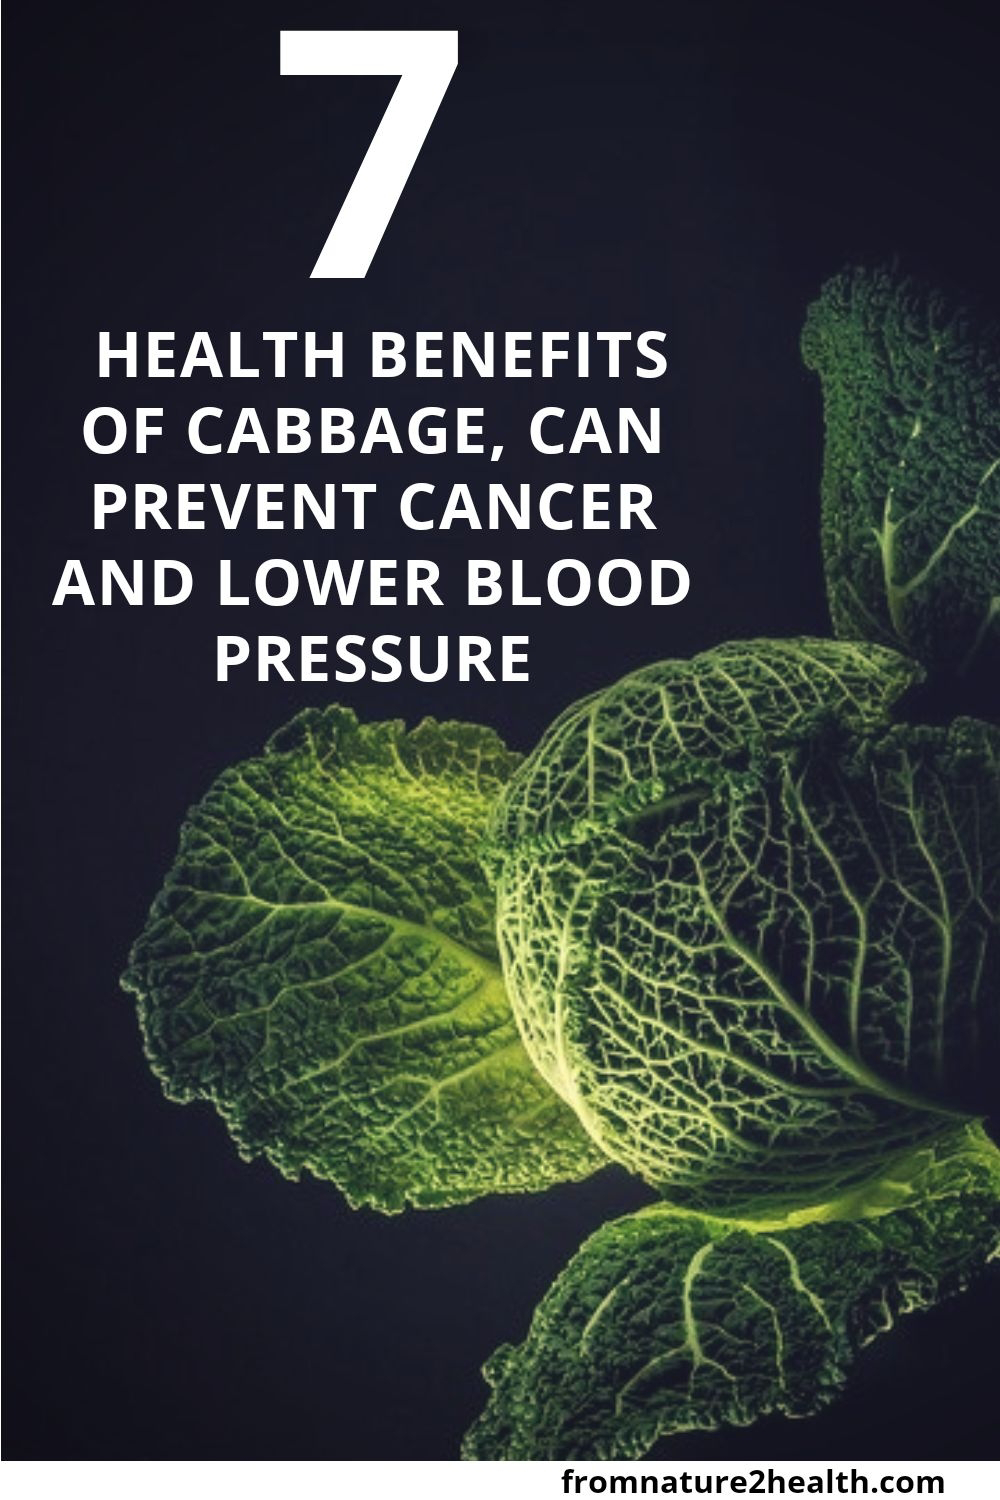 7 Health Benefits of Cabbage, Can Prevent Cancer and Lower Blood Pressure 7 Health Benefits of Cabbage, Can Prevent Cancer and Lower Blood Pressure